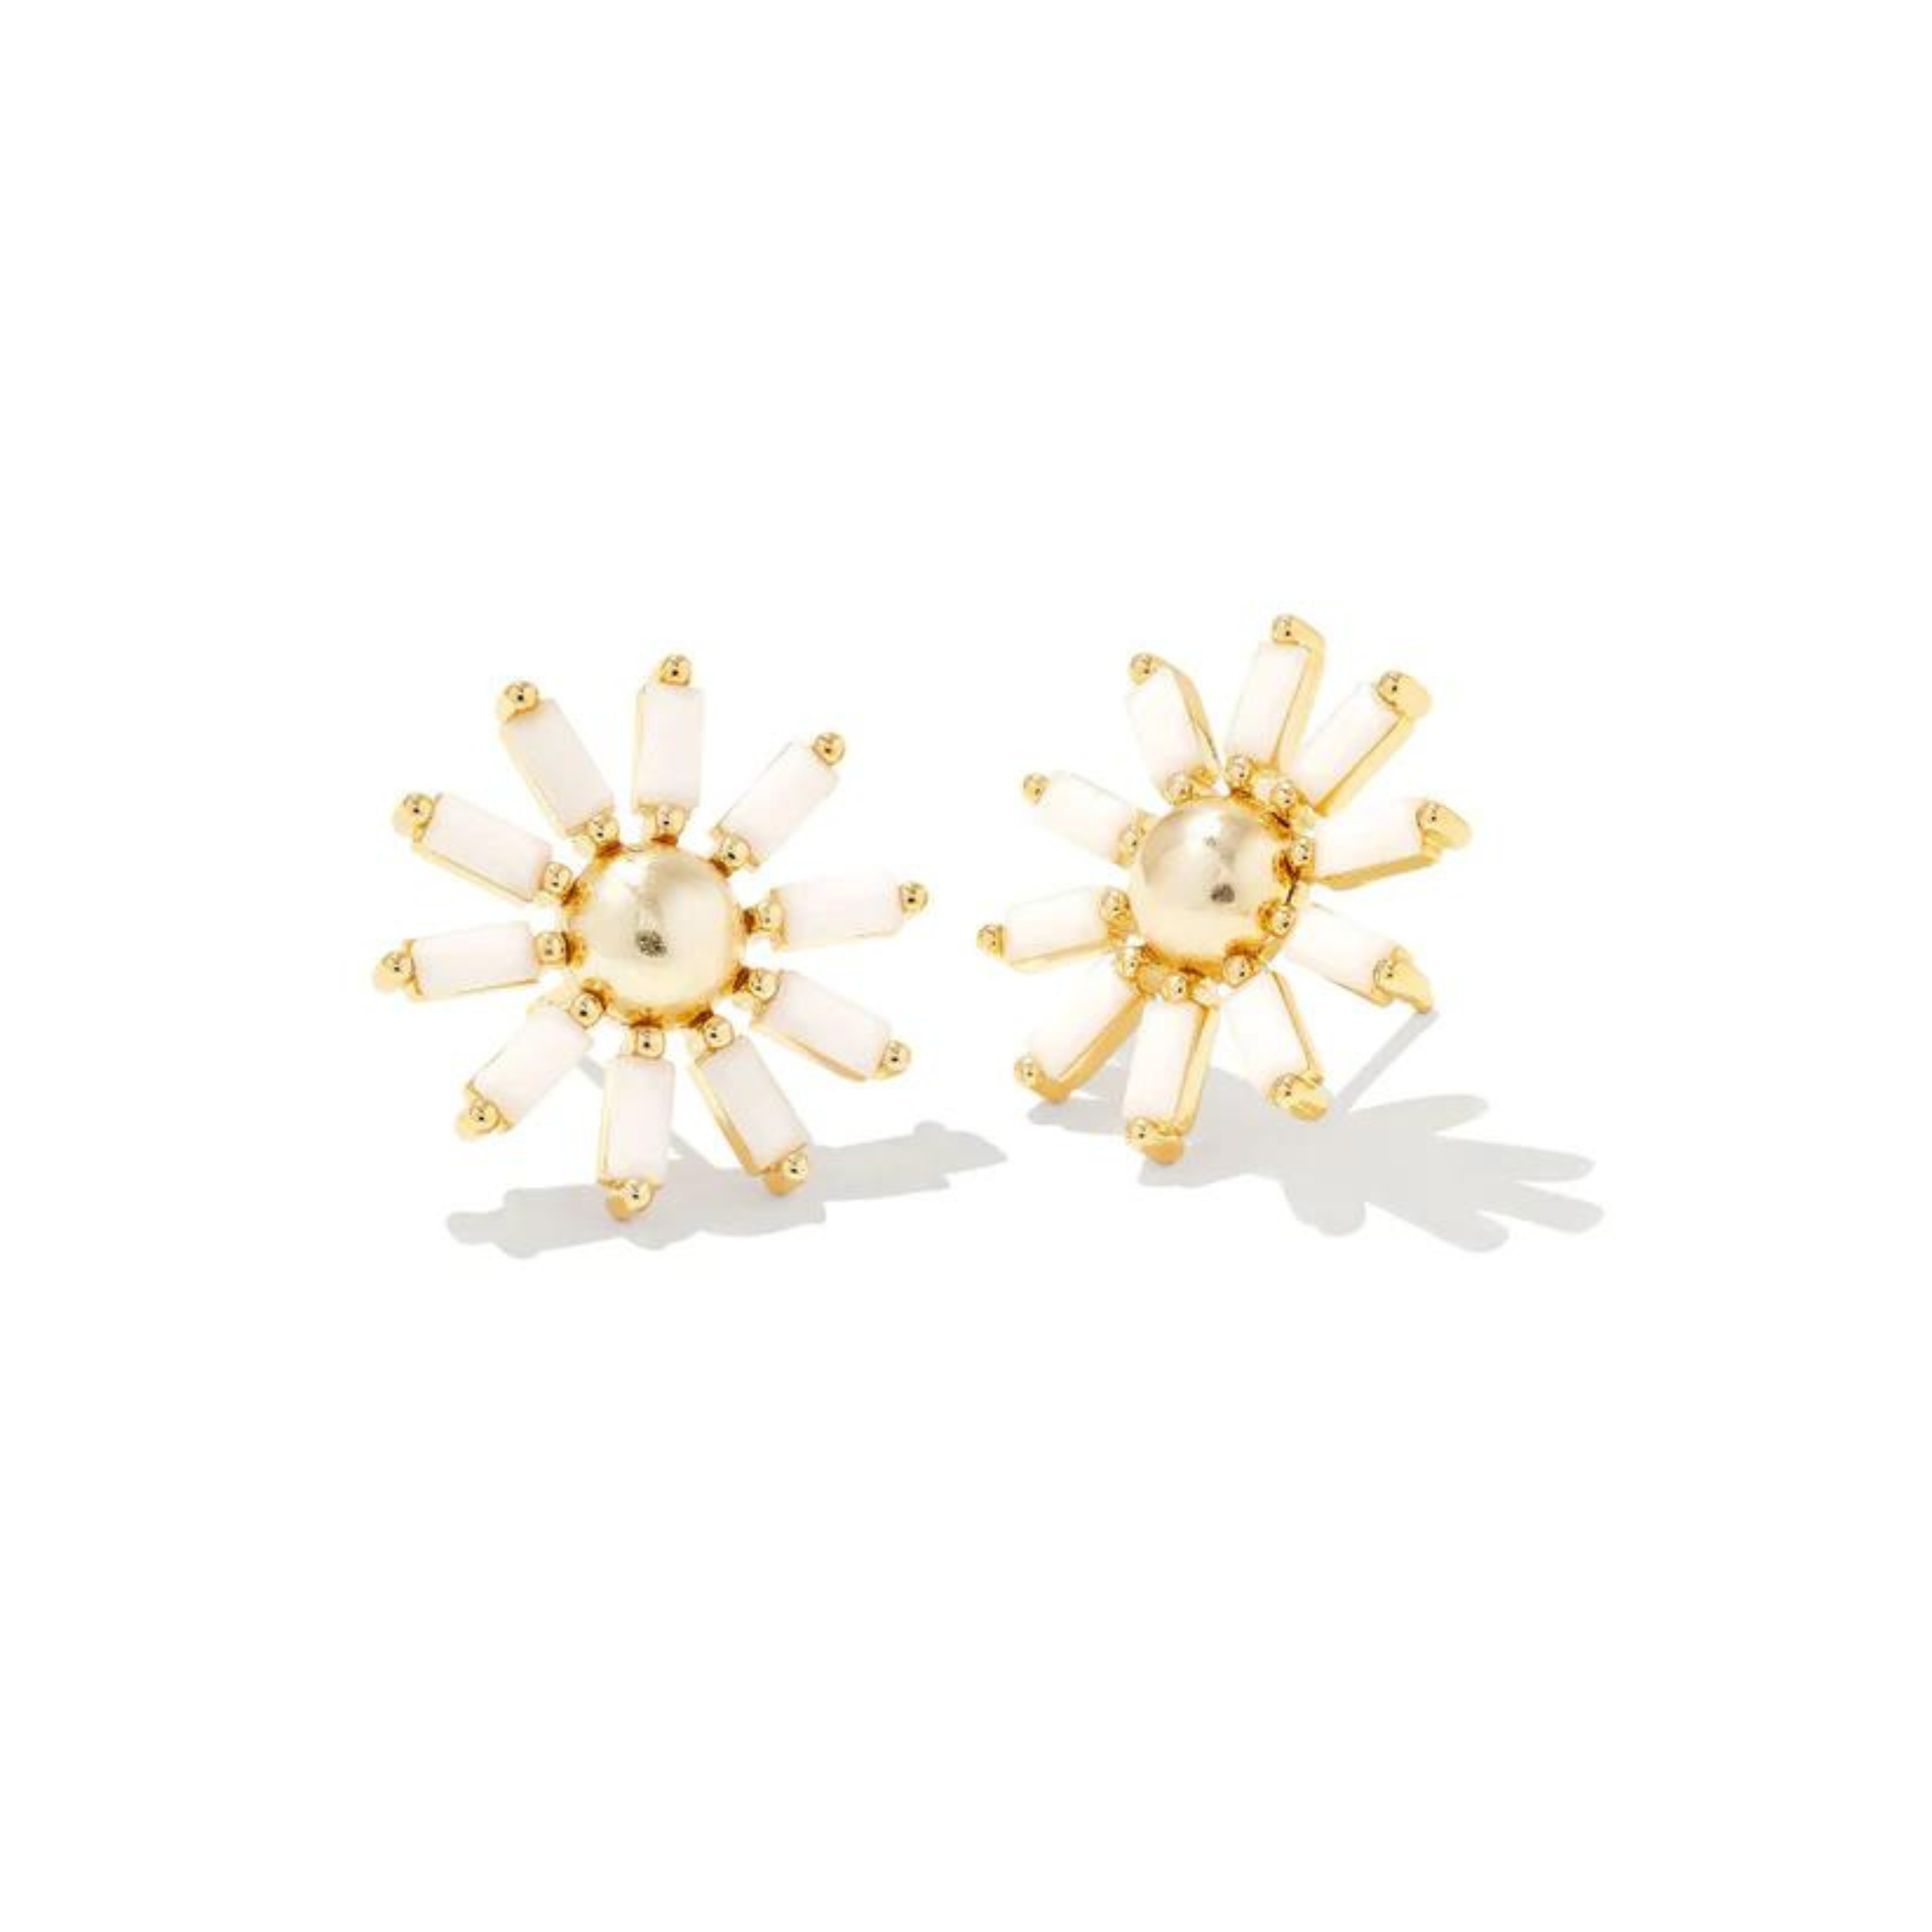 Gold daisy stud earrings with white opague class, pictured on a white background.